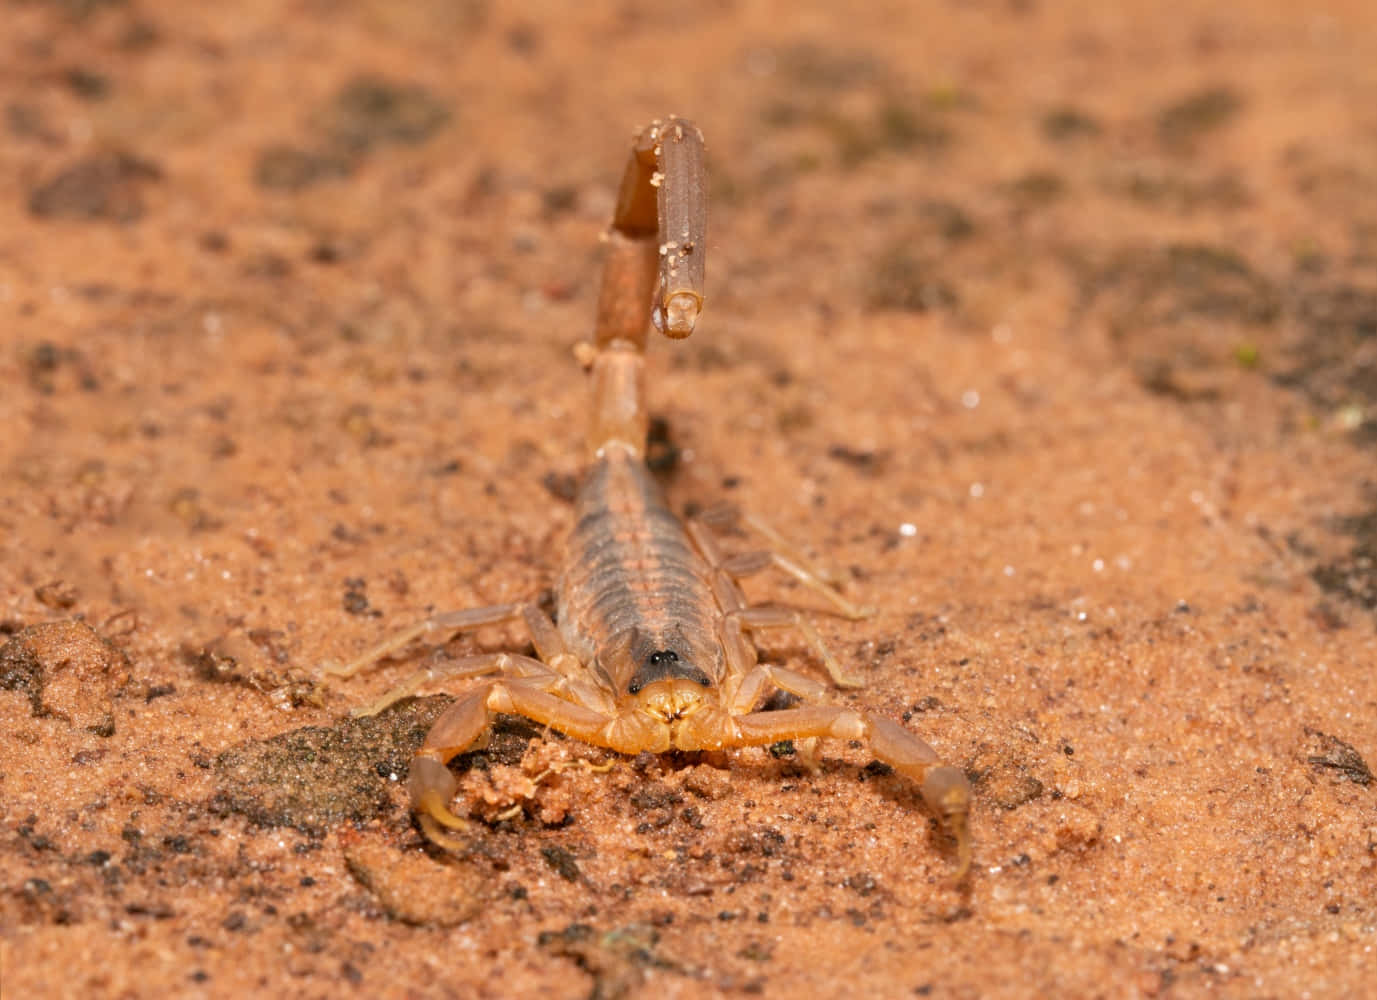 Be Aware of This Deadly Scorpion